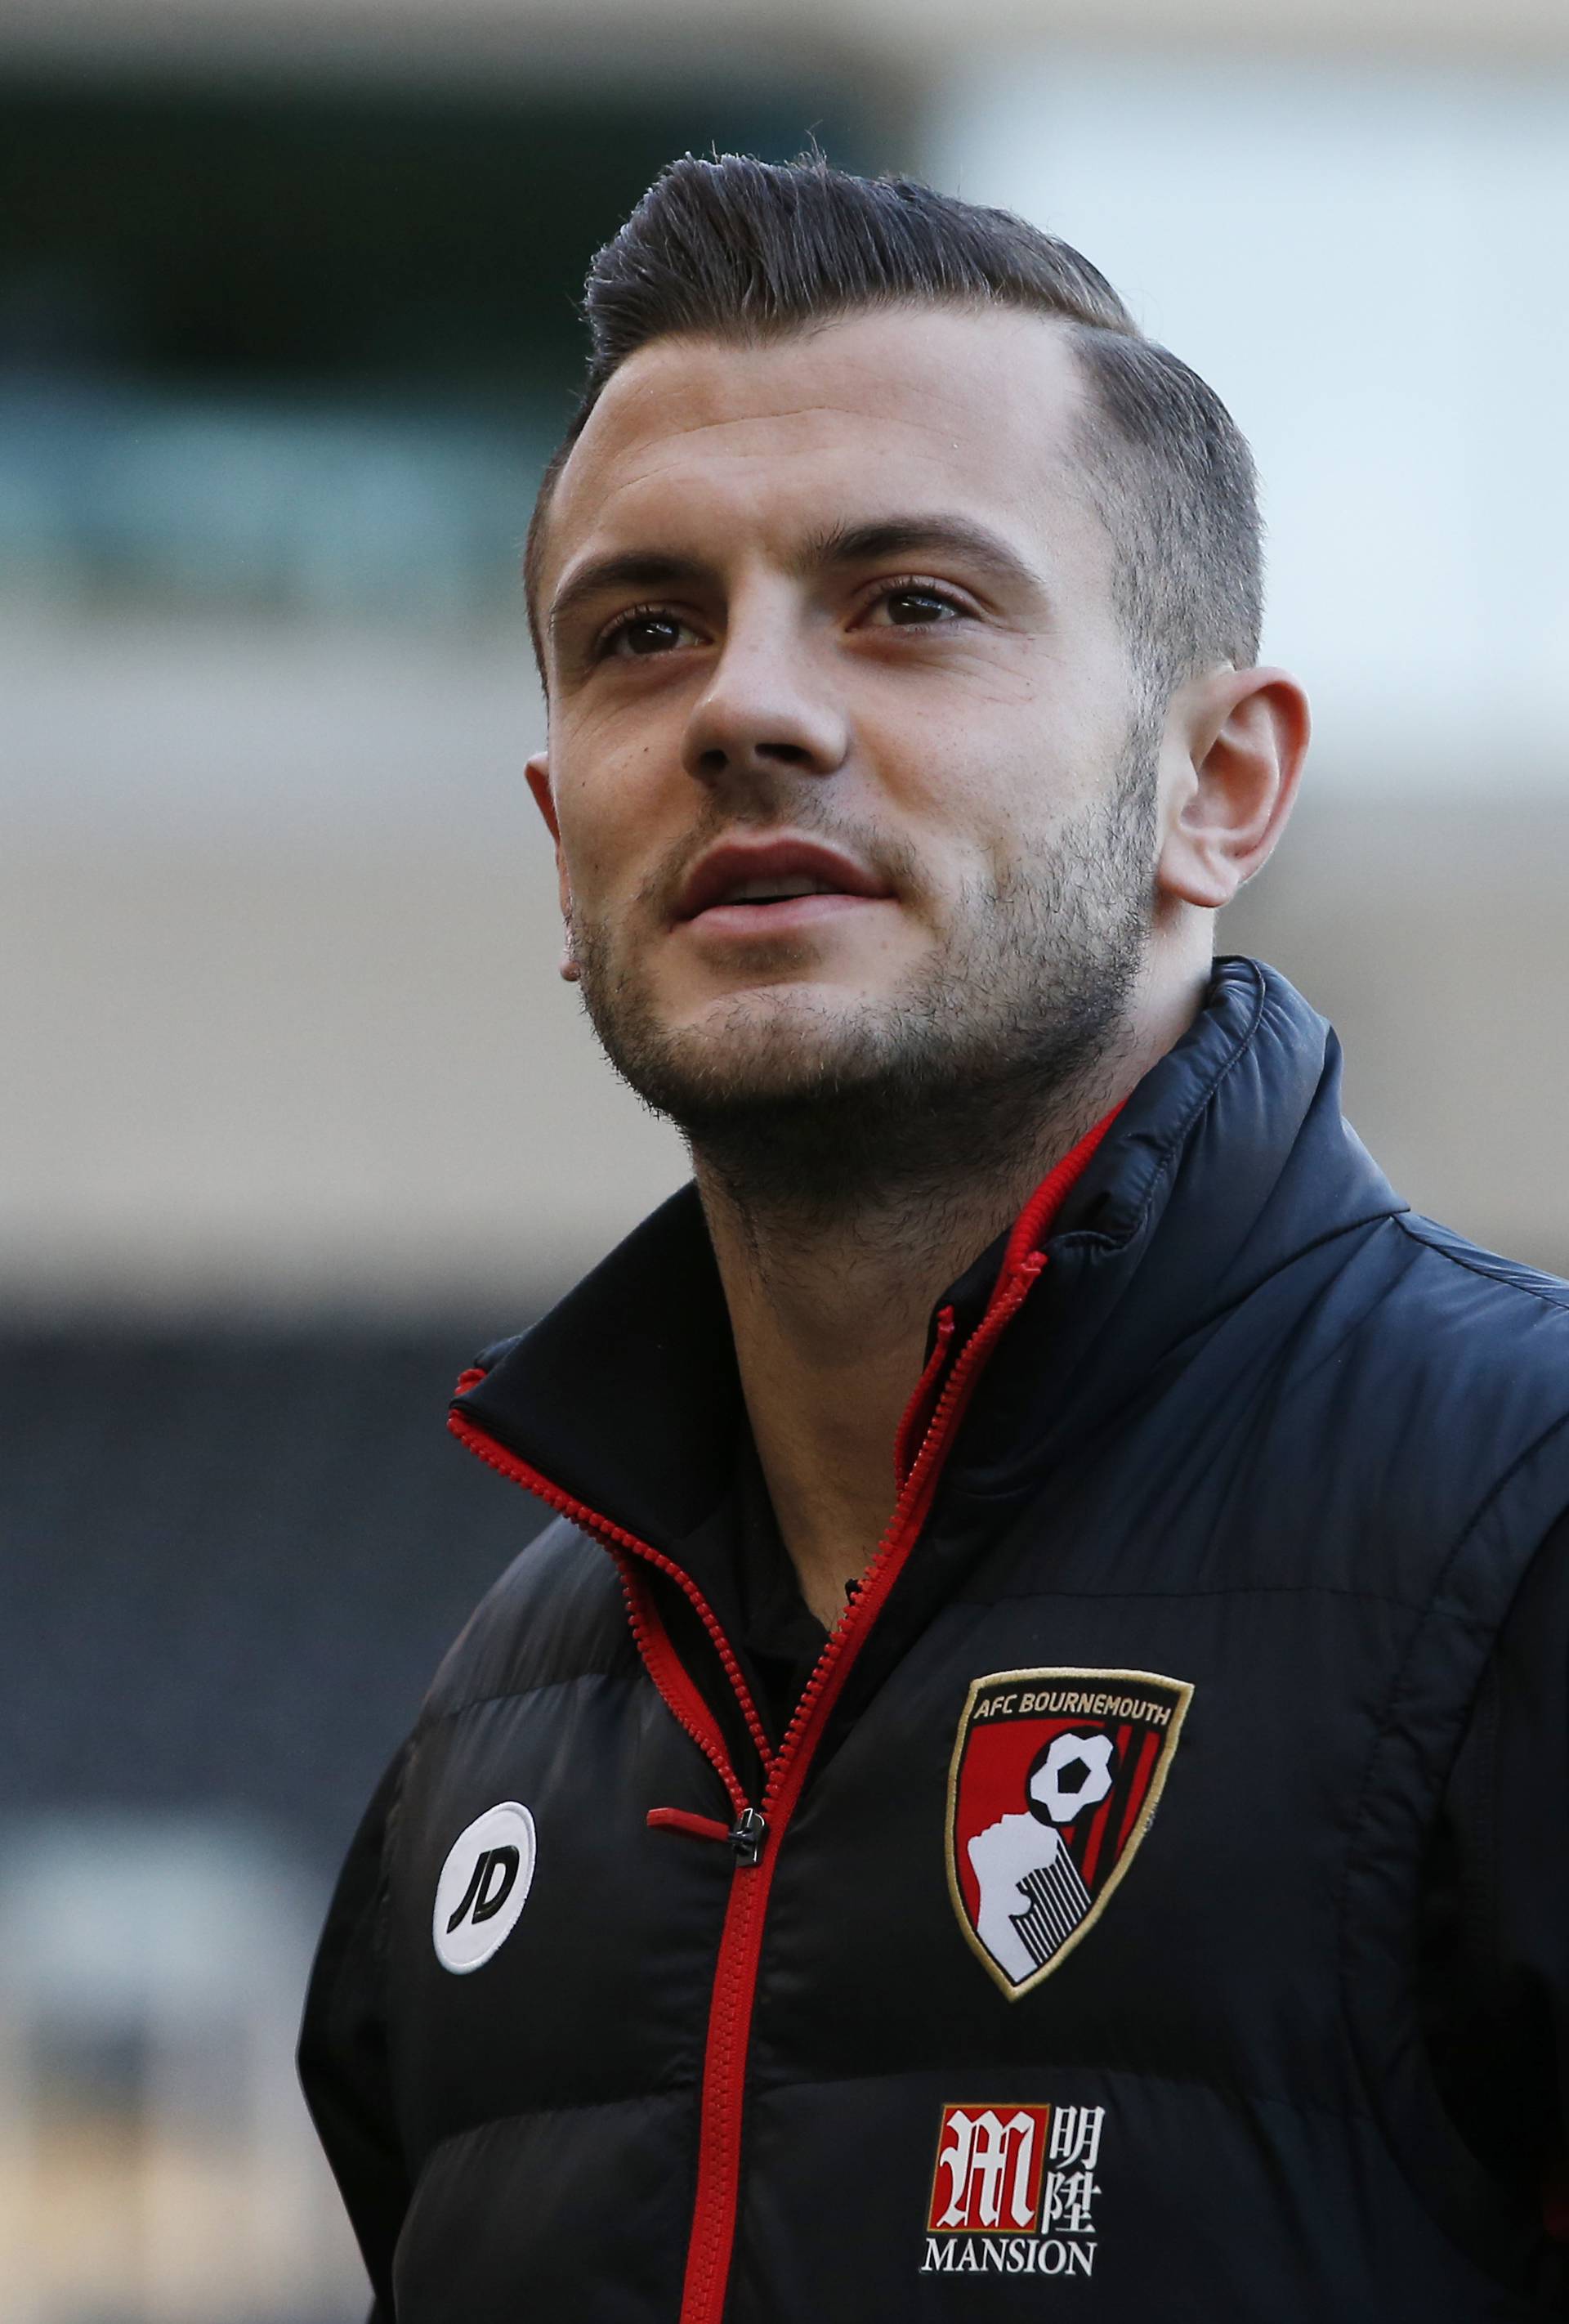 Bournemouth's Jack Wilshere before the game